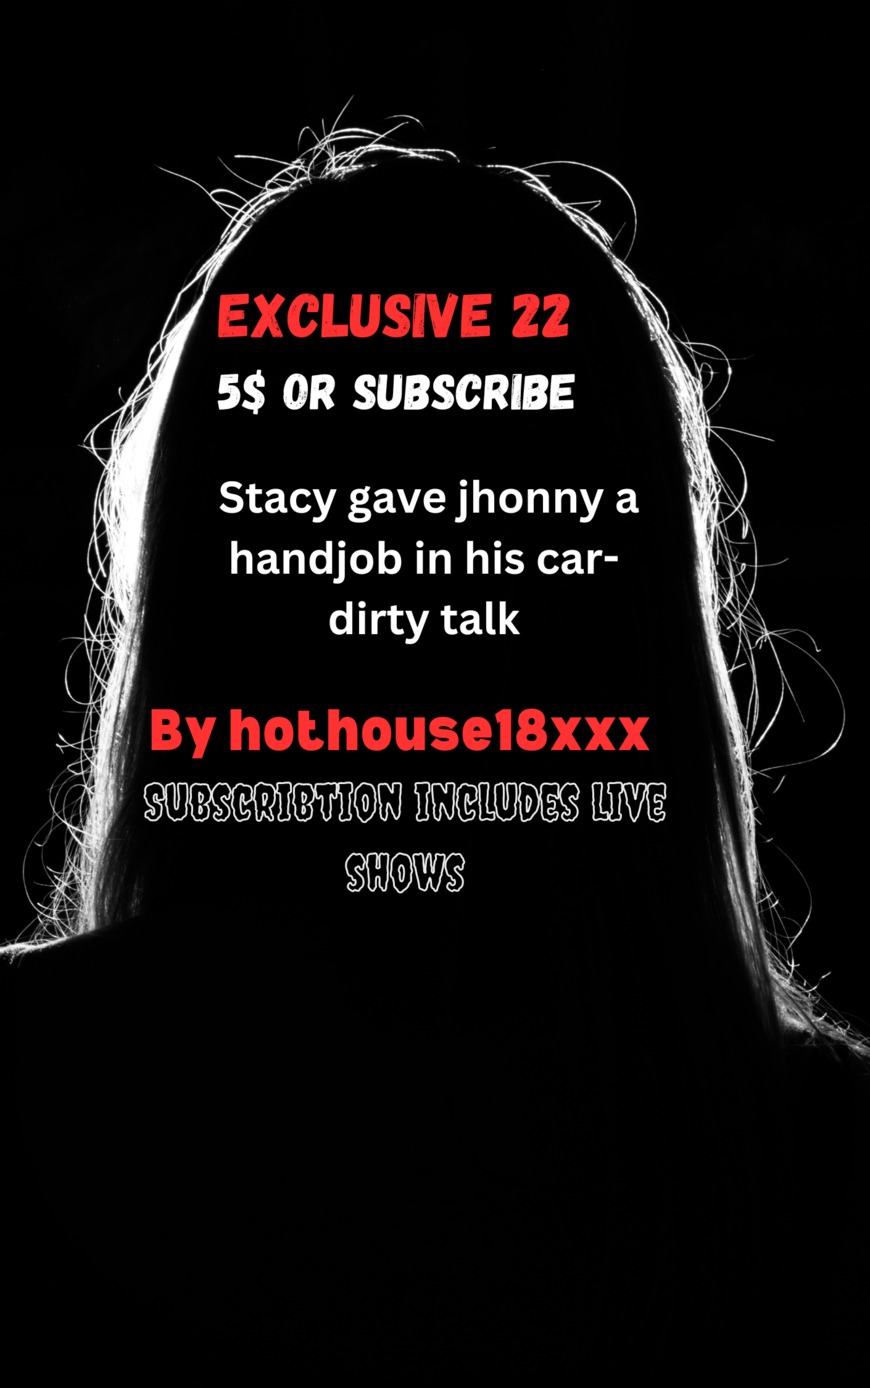 Exclusive 22 Stacy gave jhonny a handjob in his car dirty talk - clip coverforeground